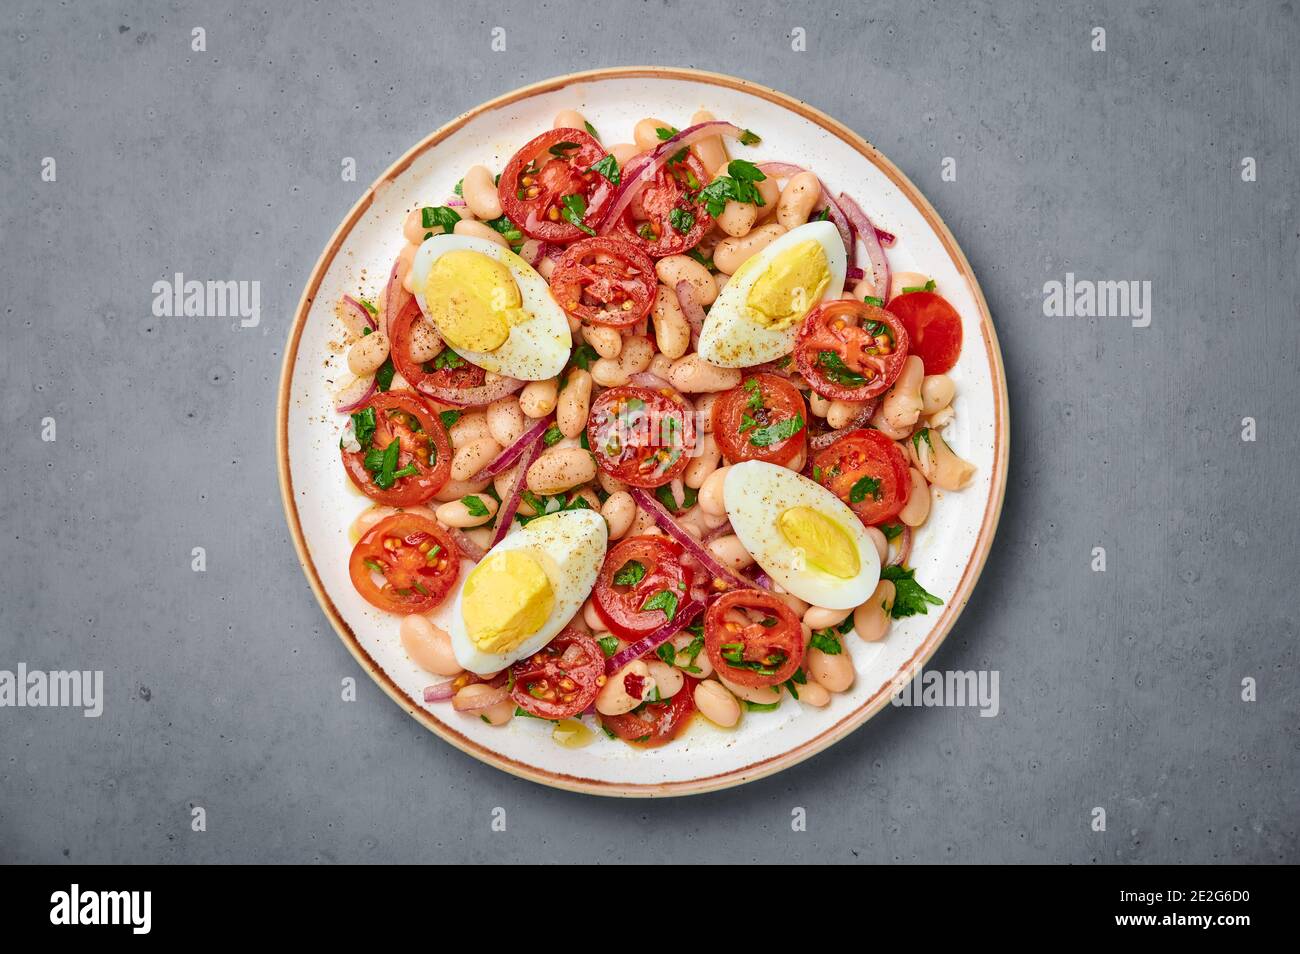 A Piyaz salad on white plate on gray concrete table top. Turkish cuisine vegetarian dish. Middle eastern cuisine food. Top view Stock Photo